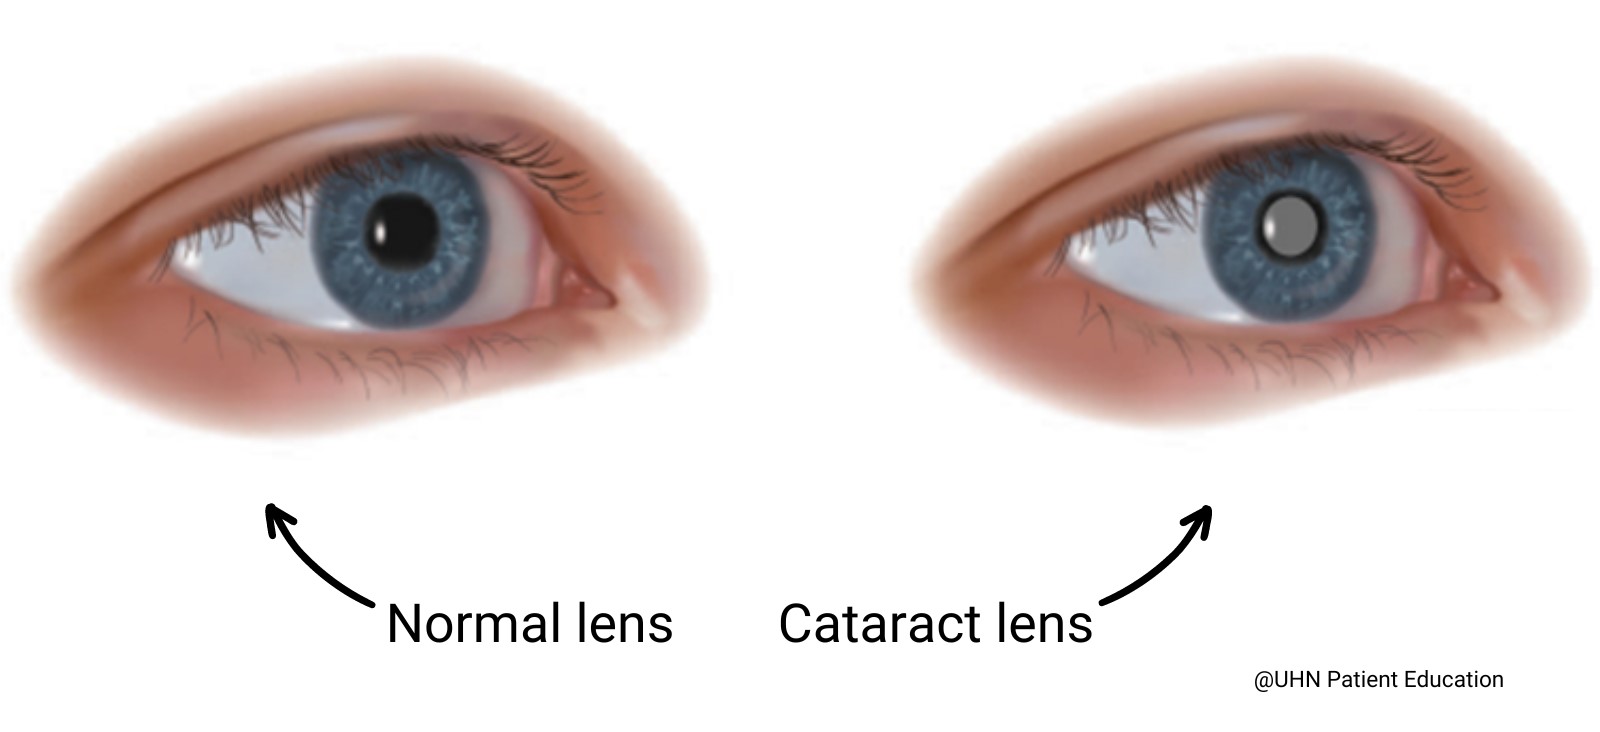 Close-up comparison of two human eyes: one with a normal lens and the other with a cataract lens, labeled "Normal Lens" and "Cataract Lens" respectively. The eye with the normal lens is clear, while the eye with the cataract lens shows a cloudy, milky appearance. Text at the bottom right credits UHN Patient Education.